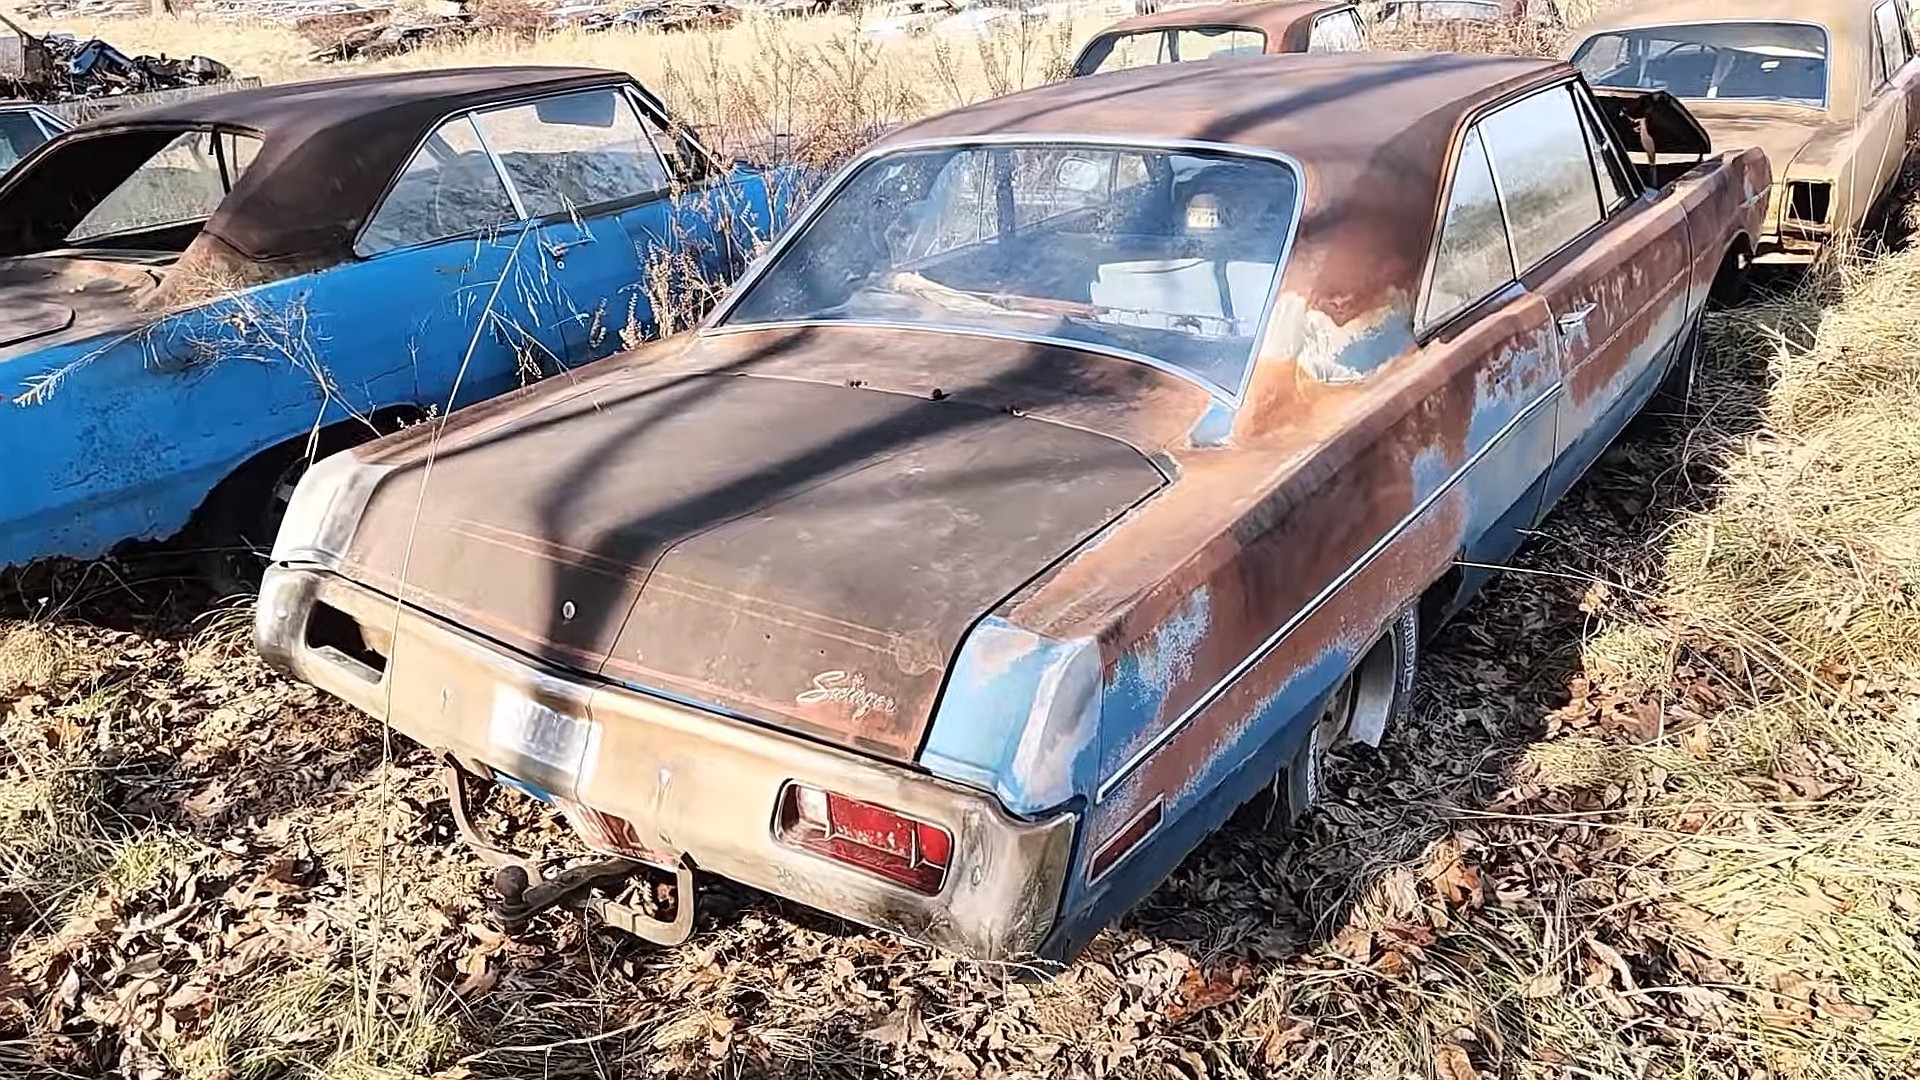 Worlds Rarest 1970 Dodge Dart Is a Super Swinger Automatic Rotting Away in a Backyard image